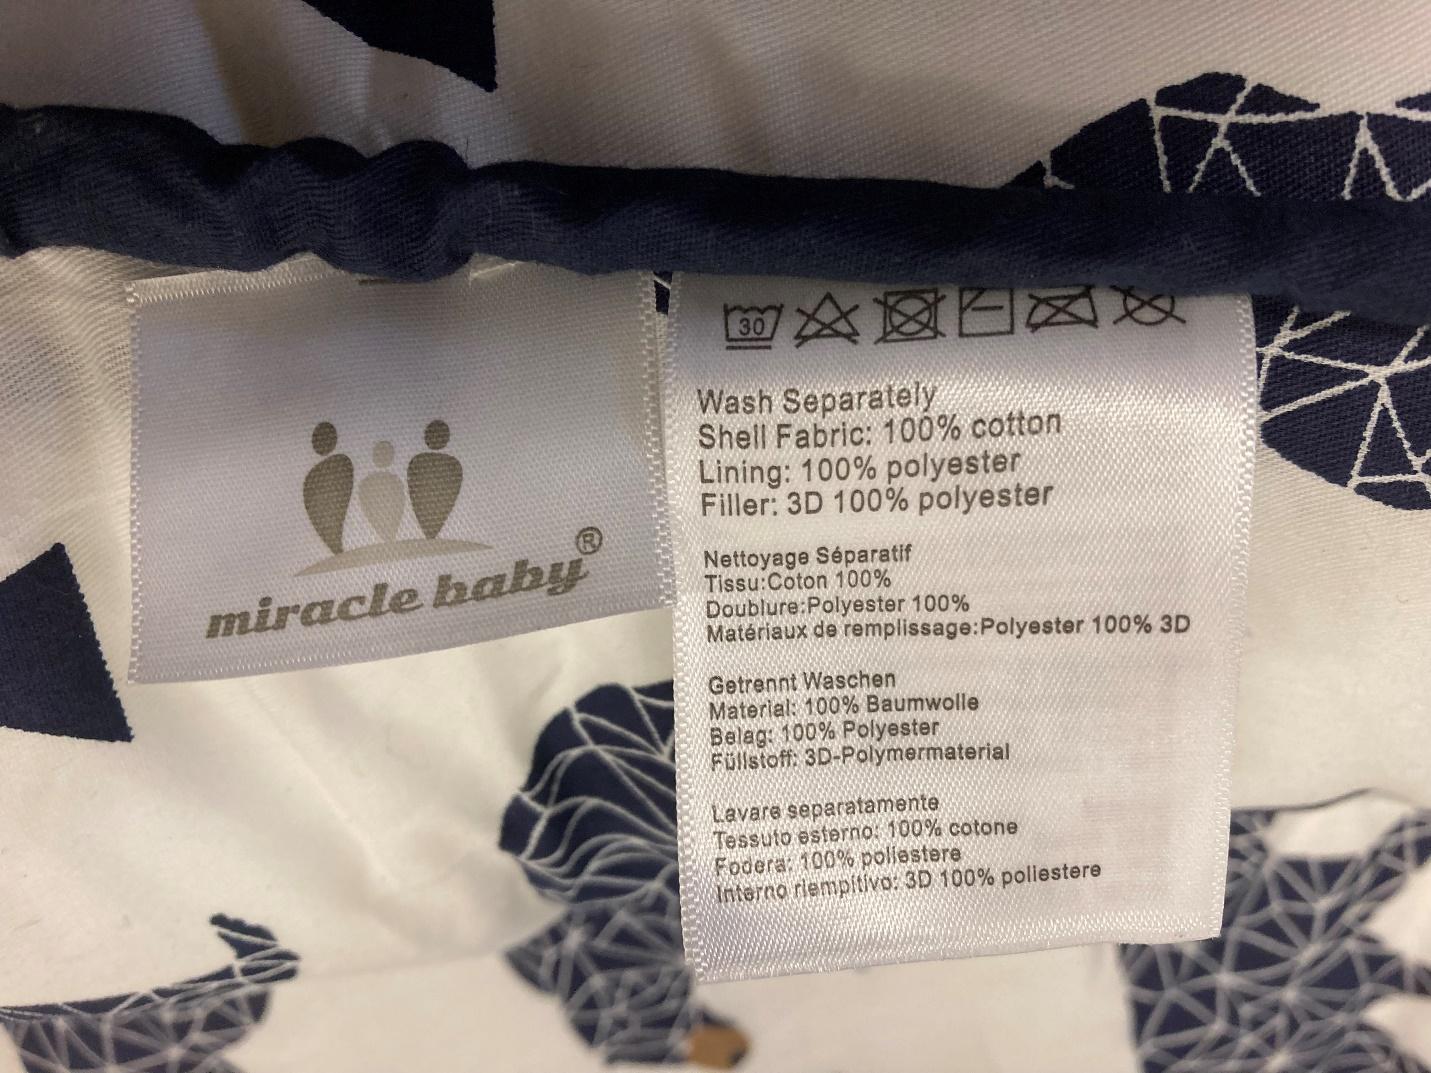 “Miracle Baby” Tag on Lounger